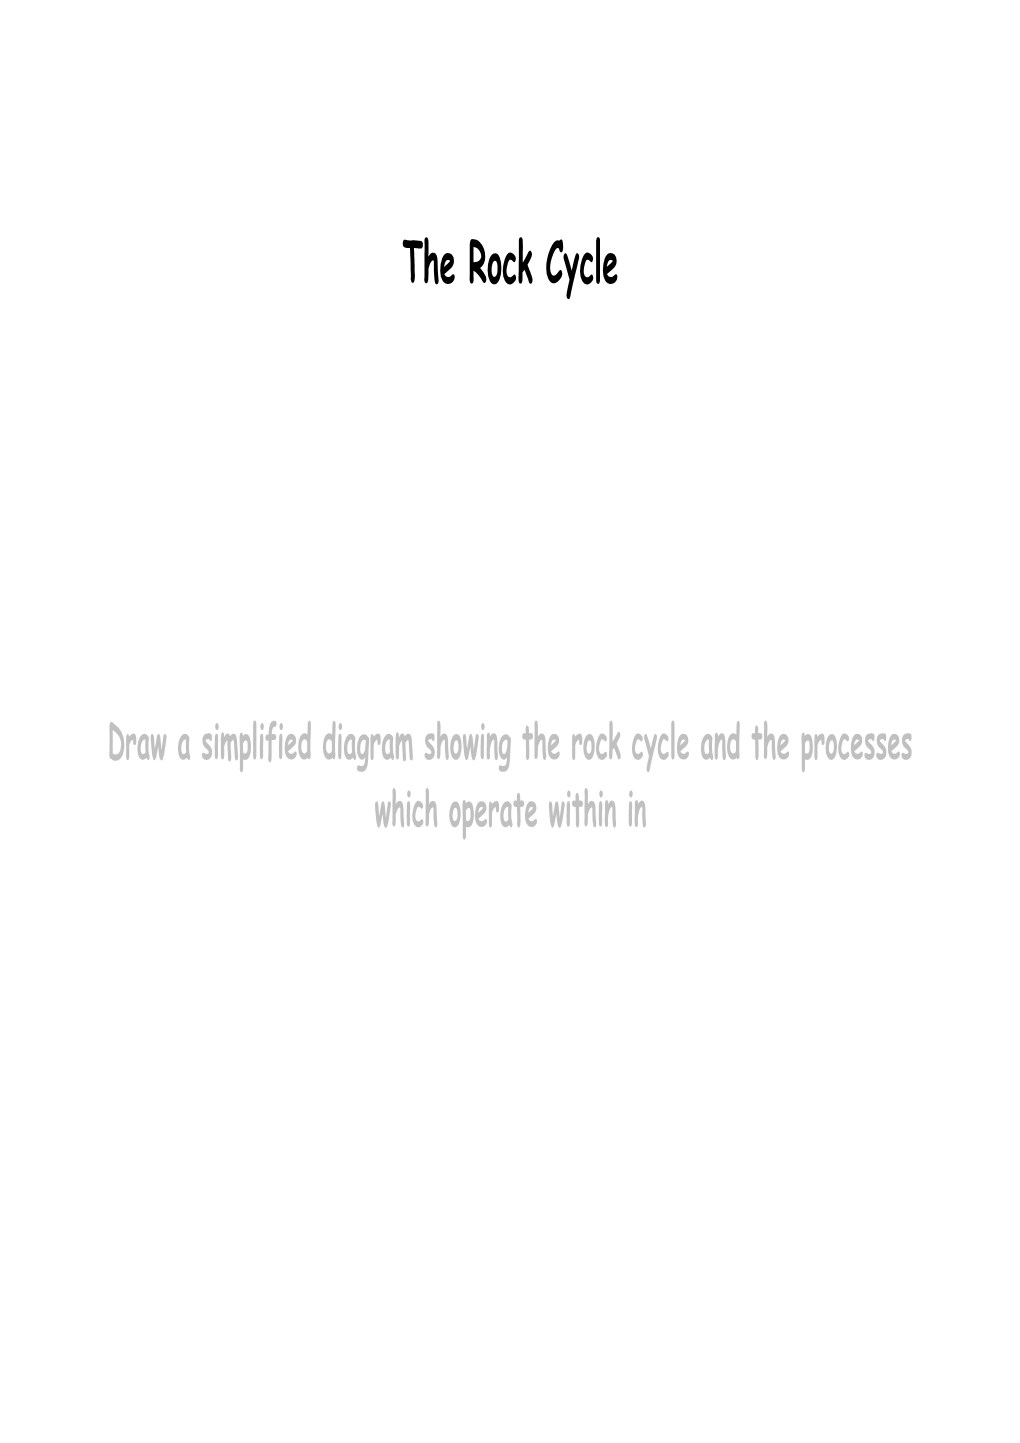 The Rock Cycle - Processes and Products